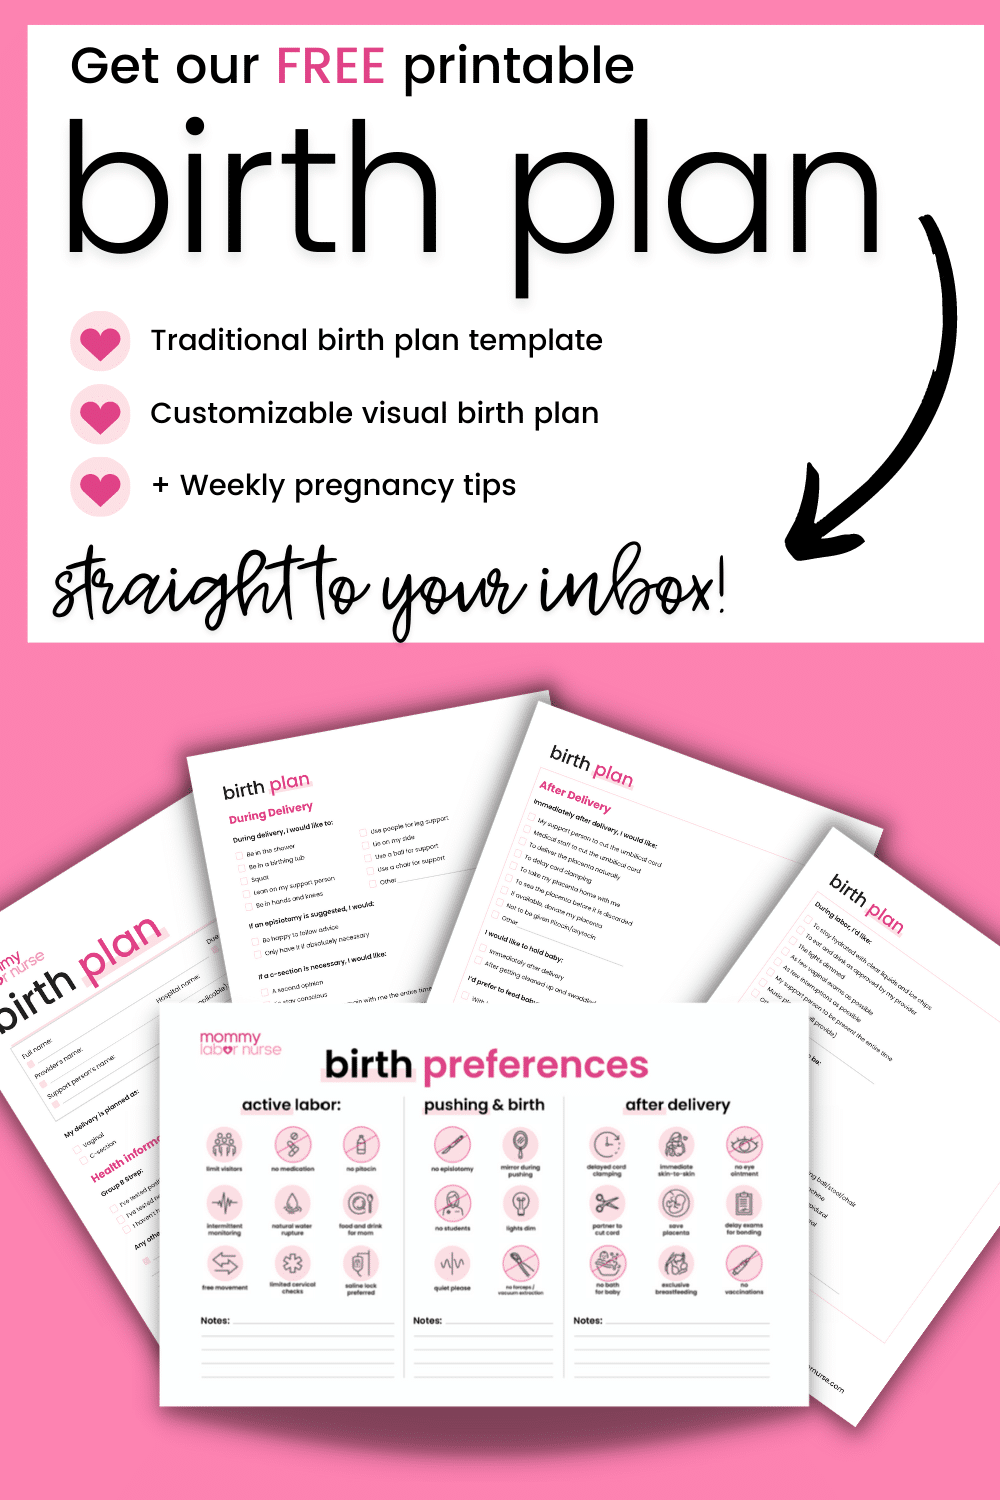 C Section Hospital Bag List: Straight From Veteran C Section Mamas!